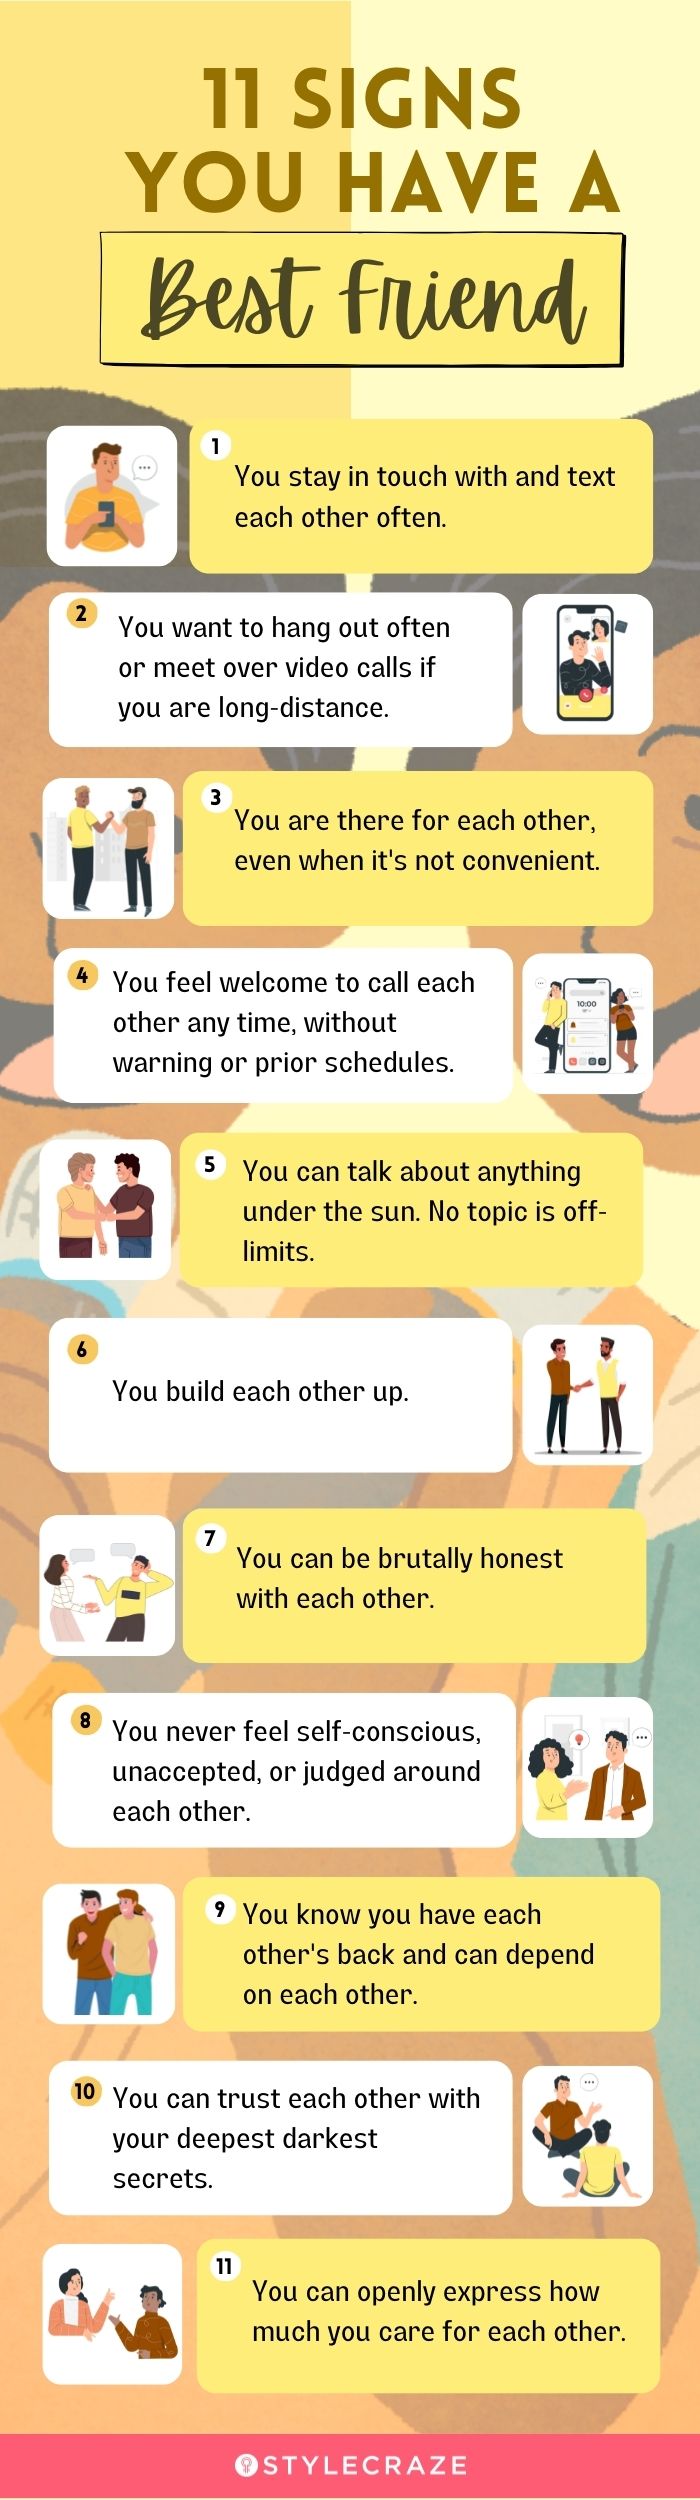 11 signs you have a best friend (infographic)